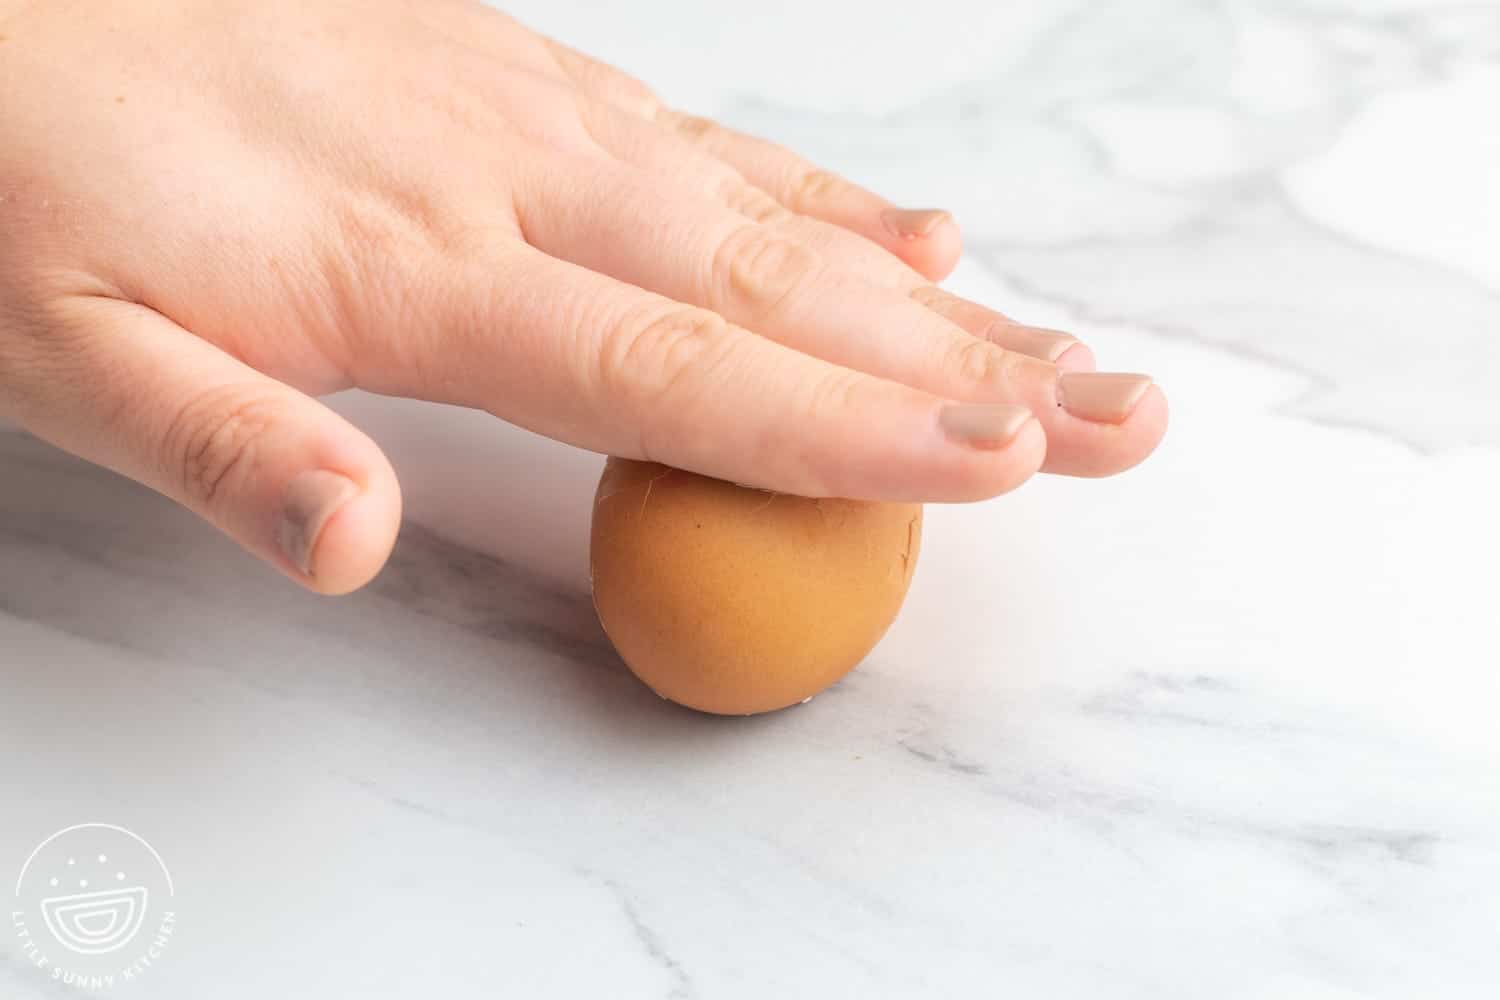 Rolling a hard boiled egg to peel it